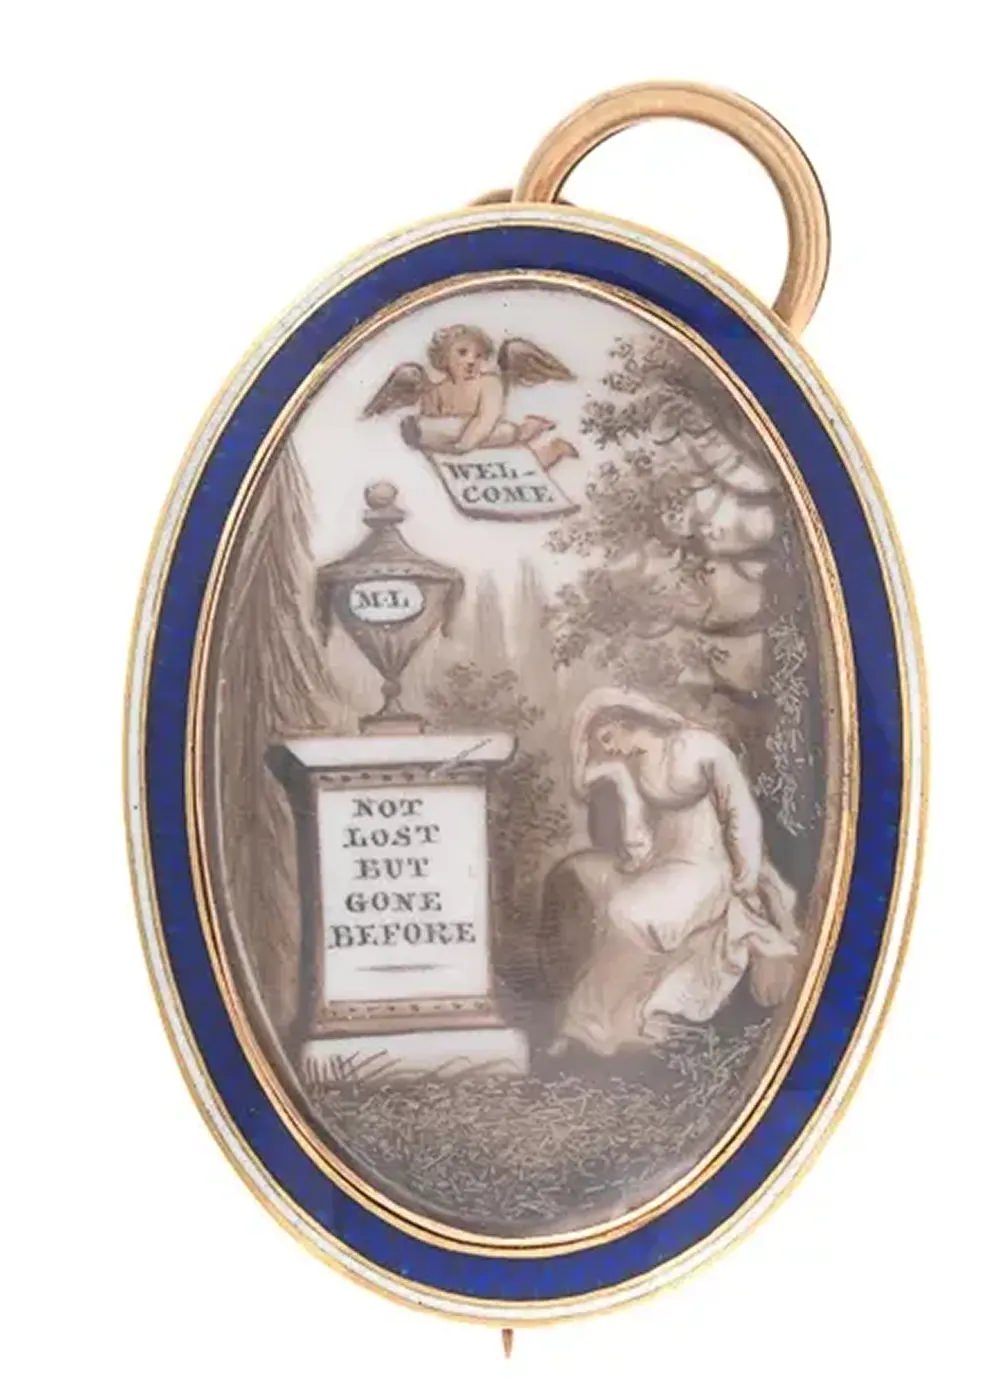 A mourning pendant with a miniature painting depicting a grieving mourner.